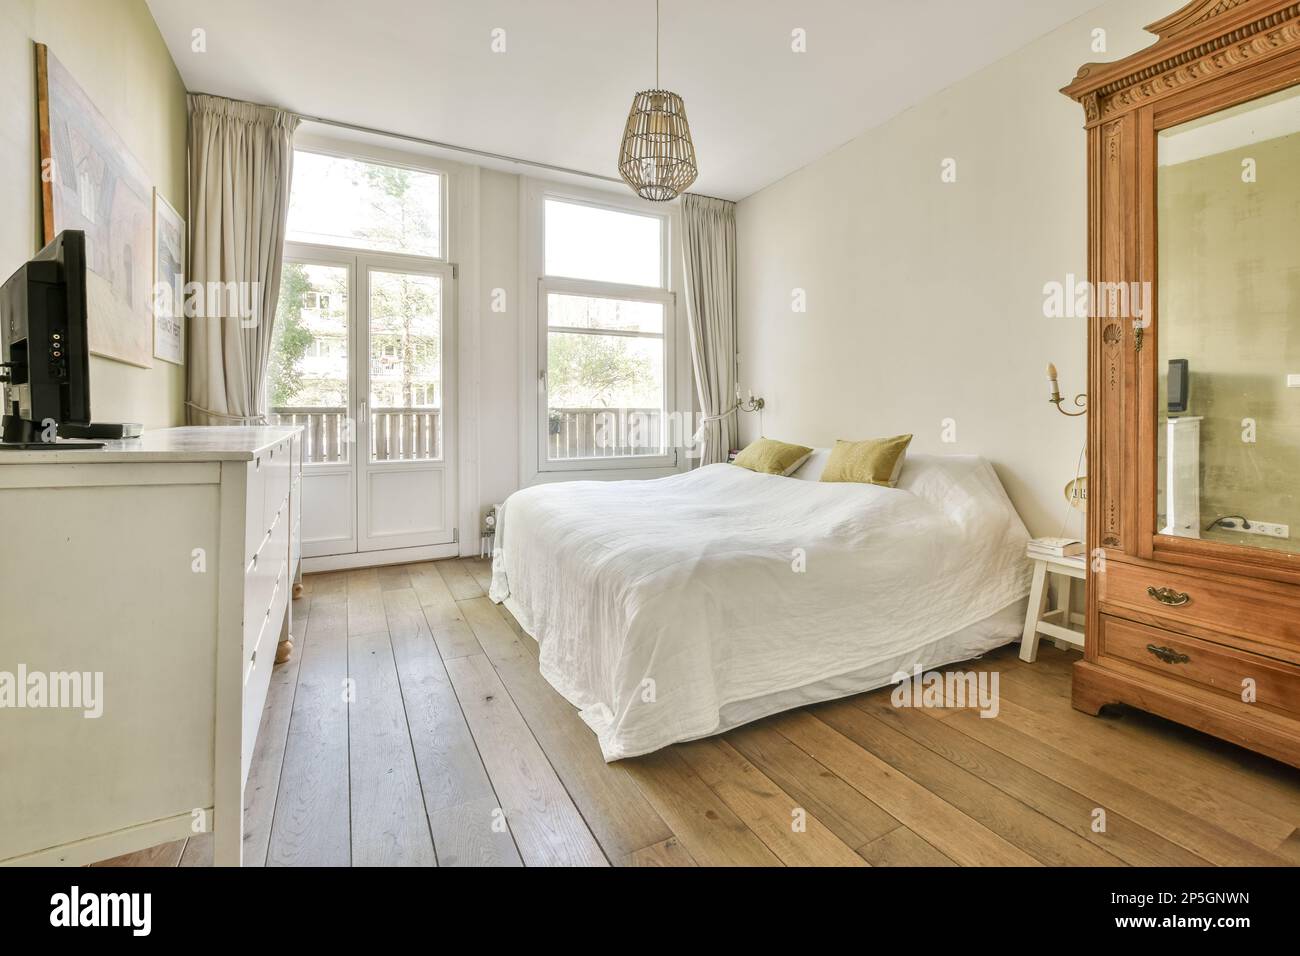 a bedroom with a bed, dresser and mirror in front of the window that looks  out to the garden outside Stock Photo - Alamy